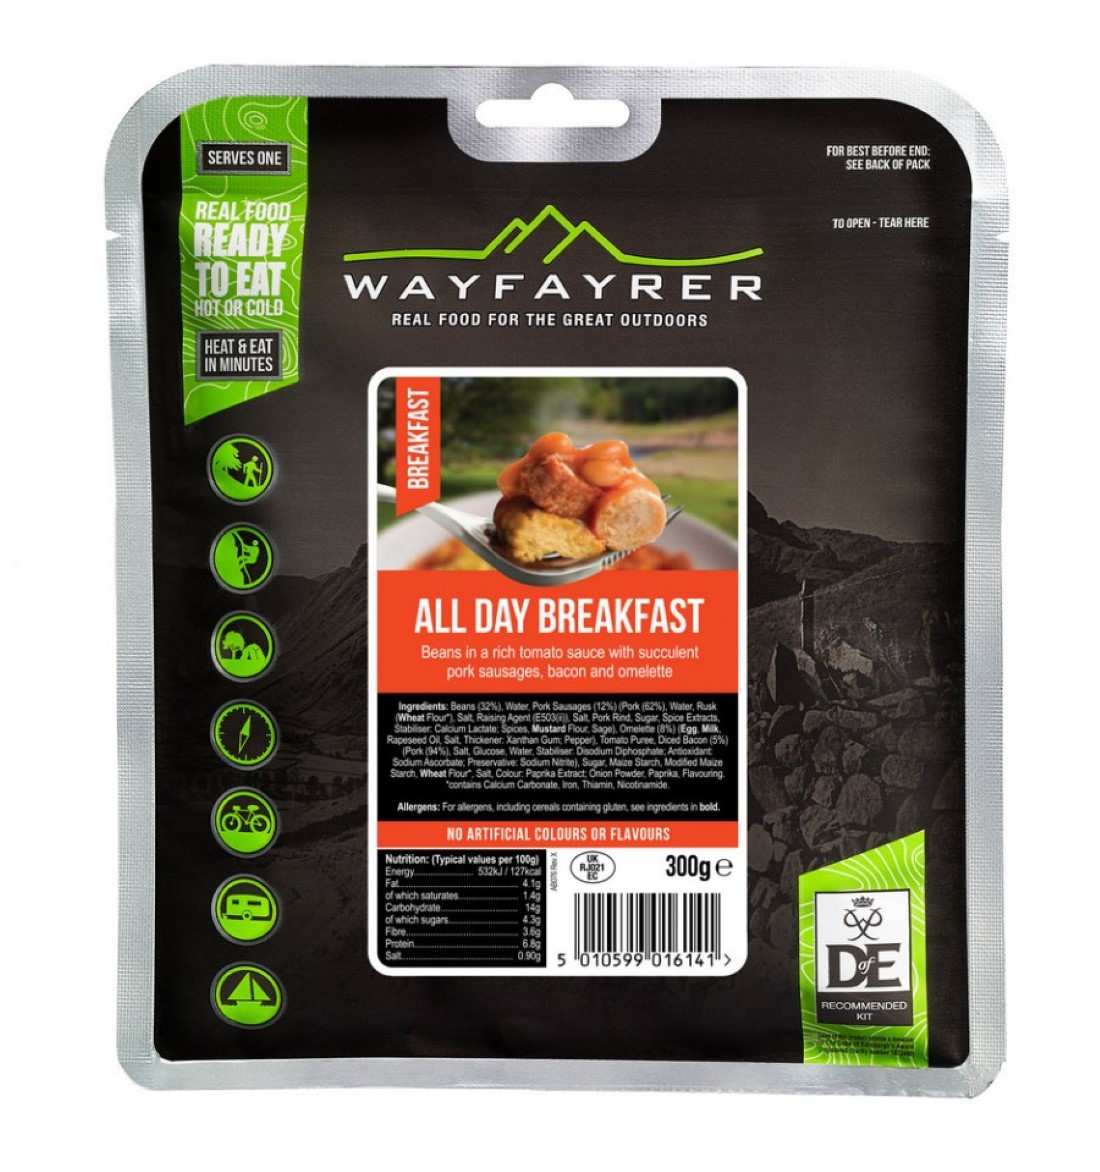 Wayfayrer All Day Breakfast – Outdoor Camping Ready to Eat Meal Pouch